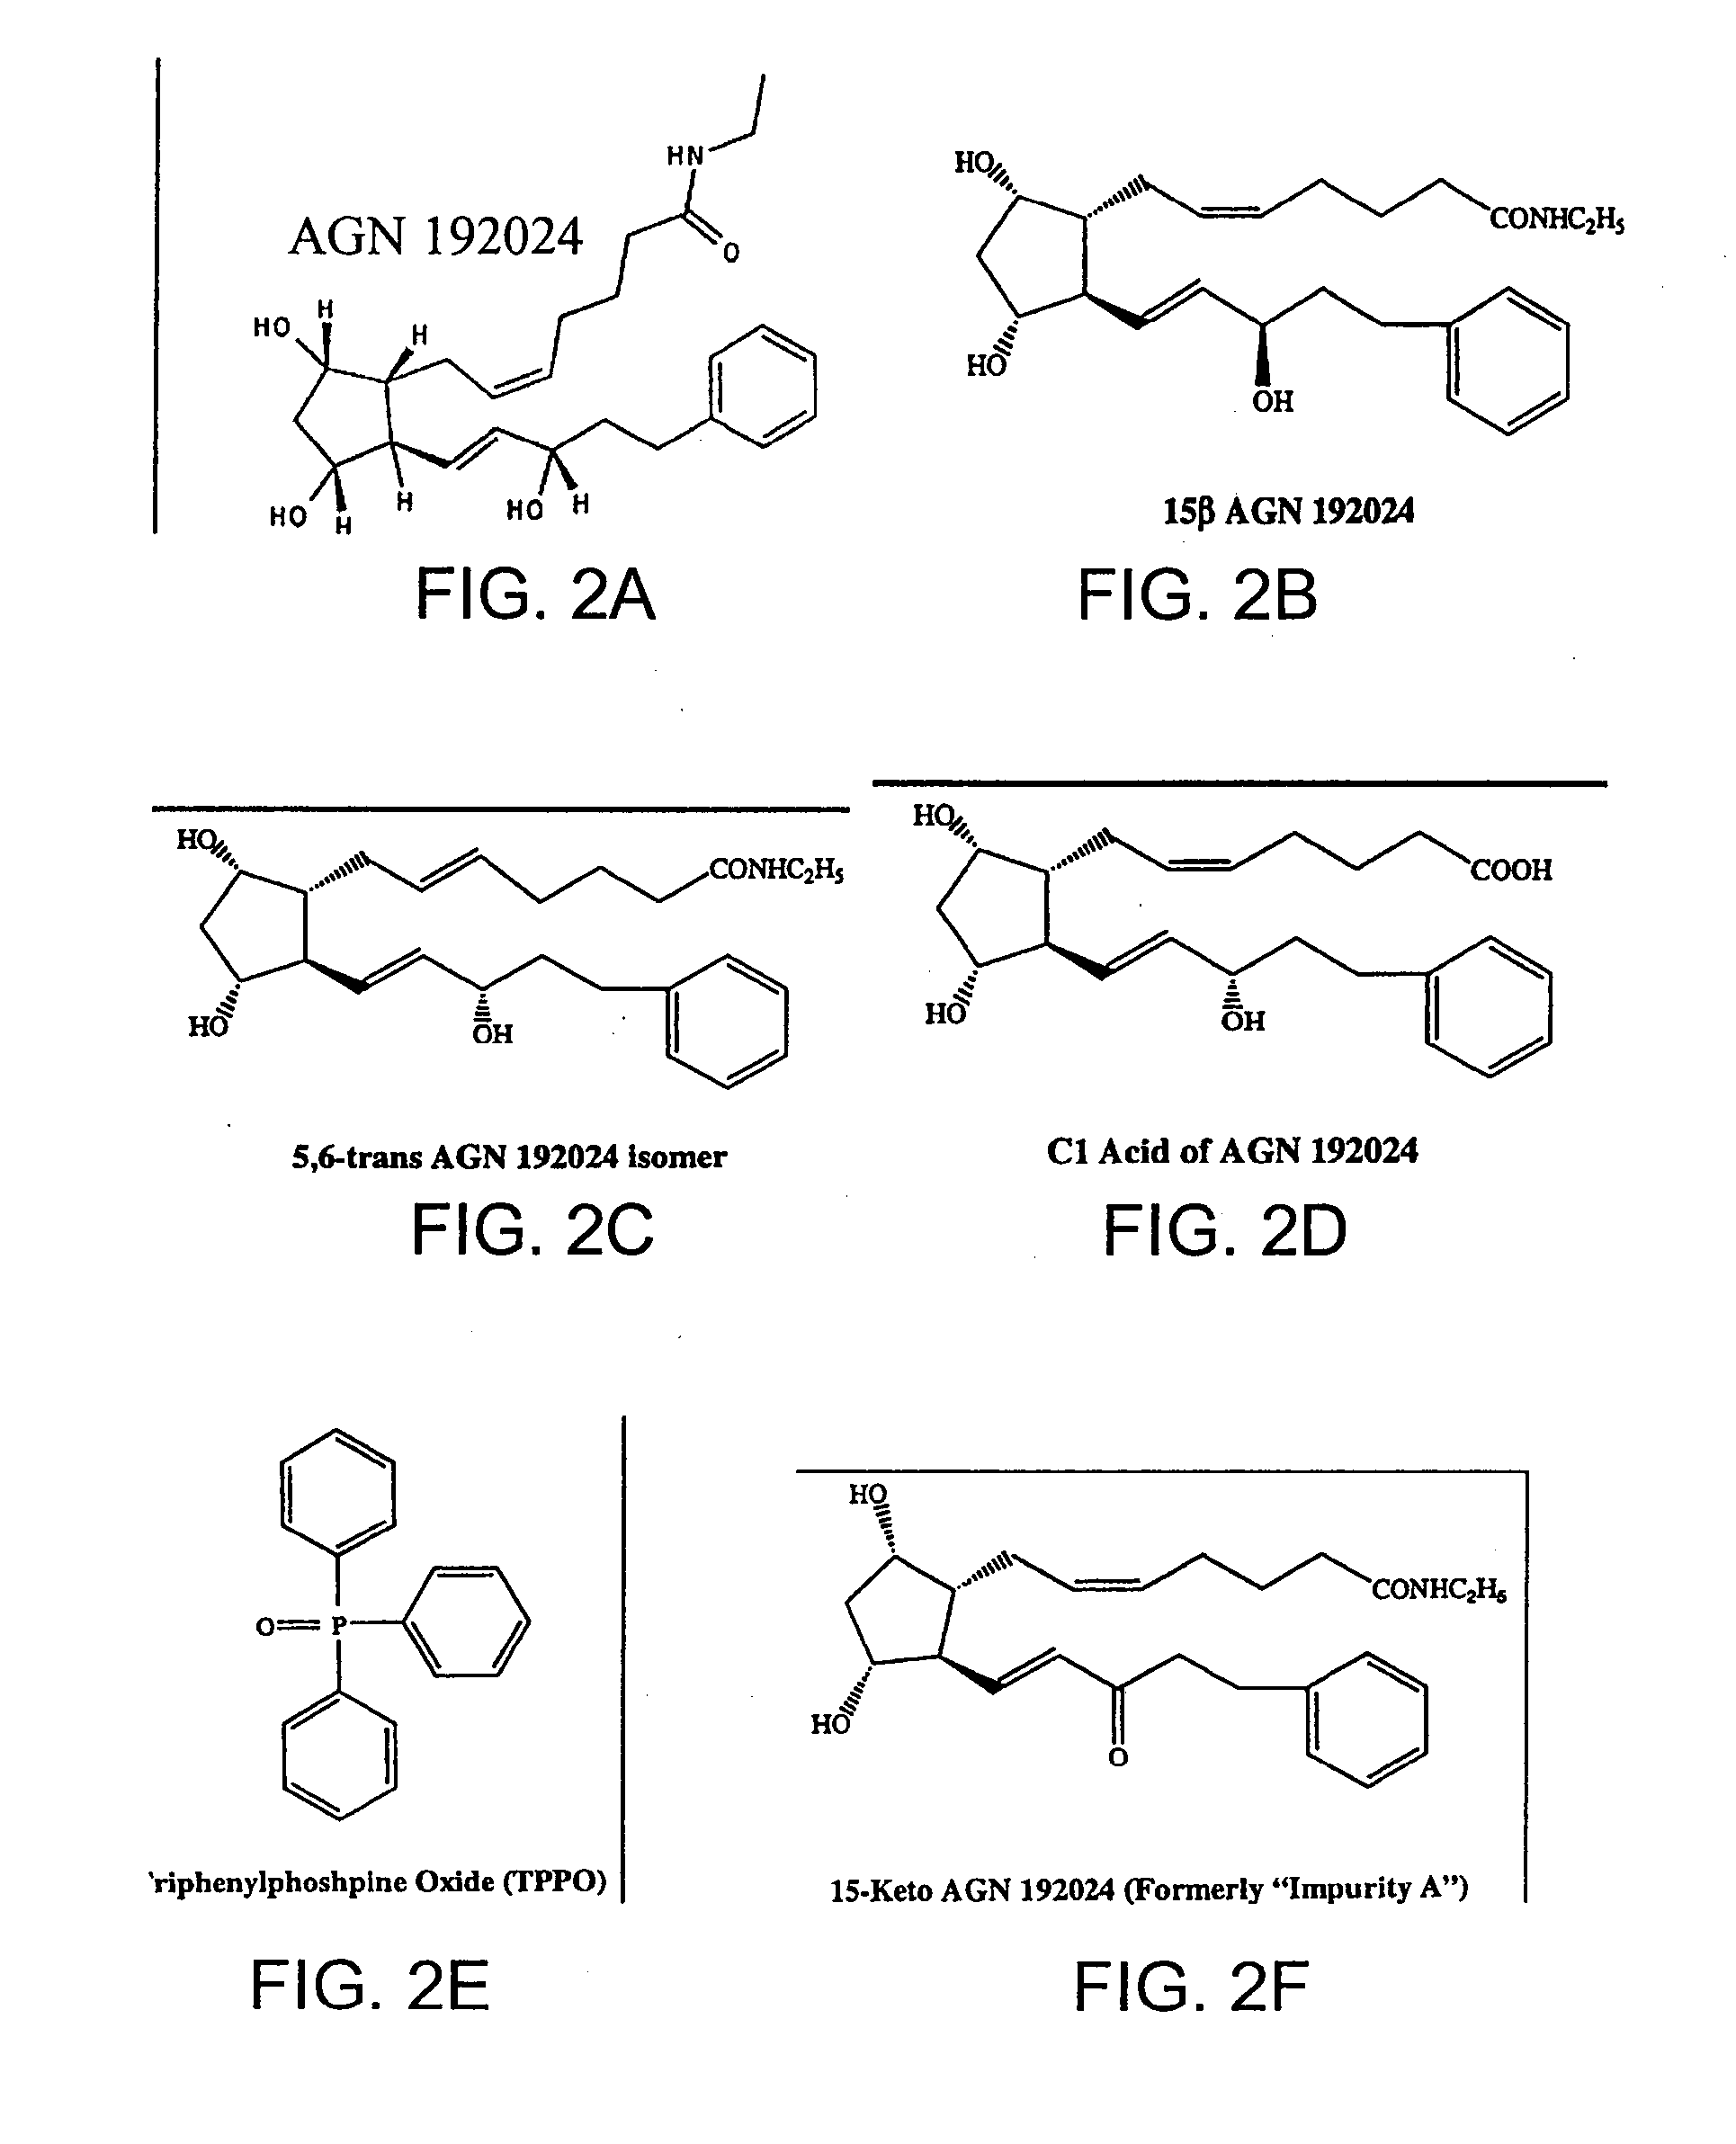 Oil-in-oil emulsified polymeric implants containing a hypotensive lipid and related methods